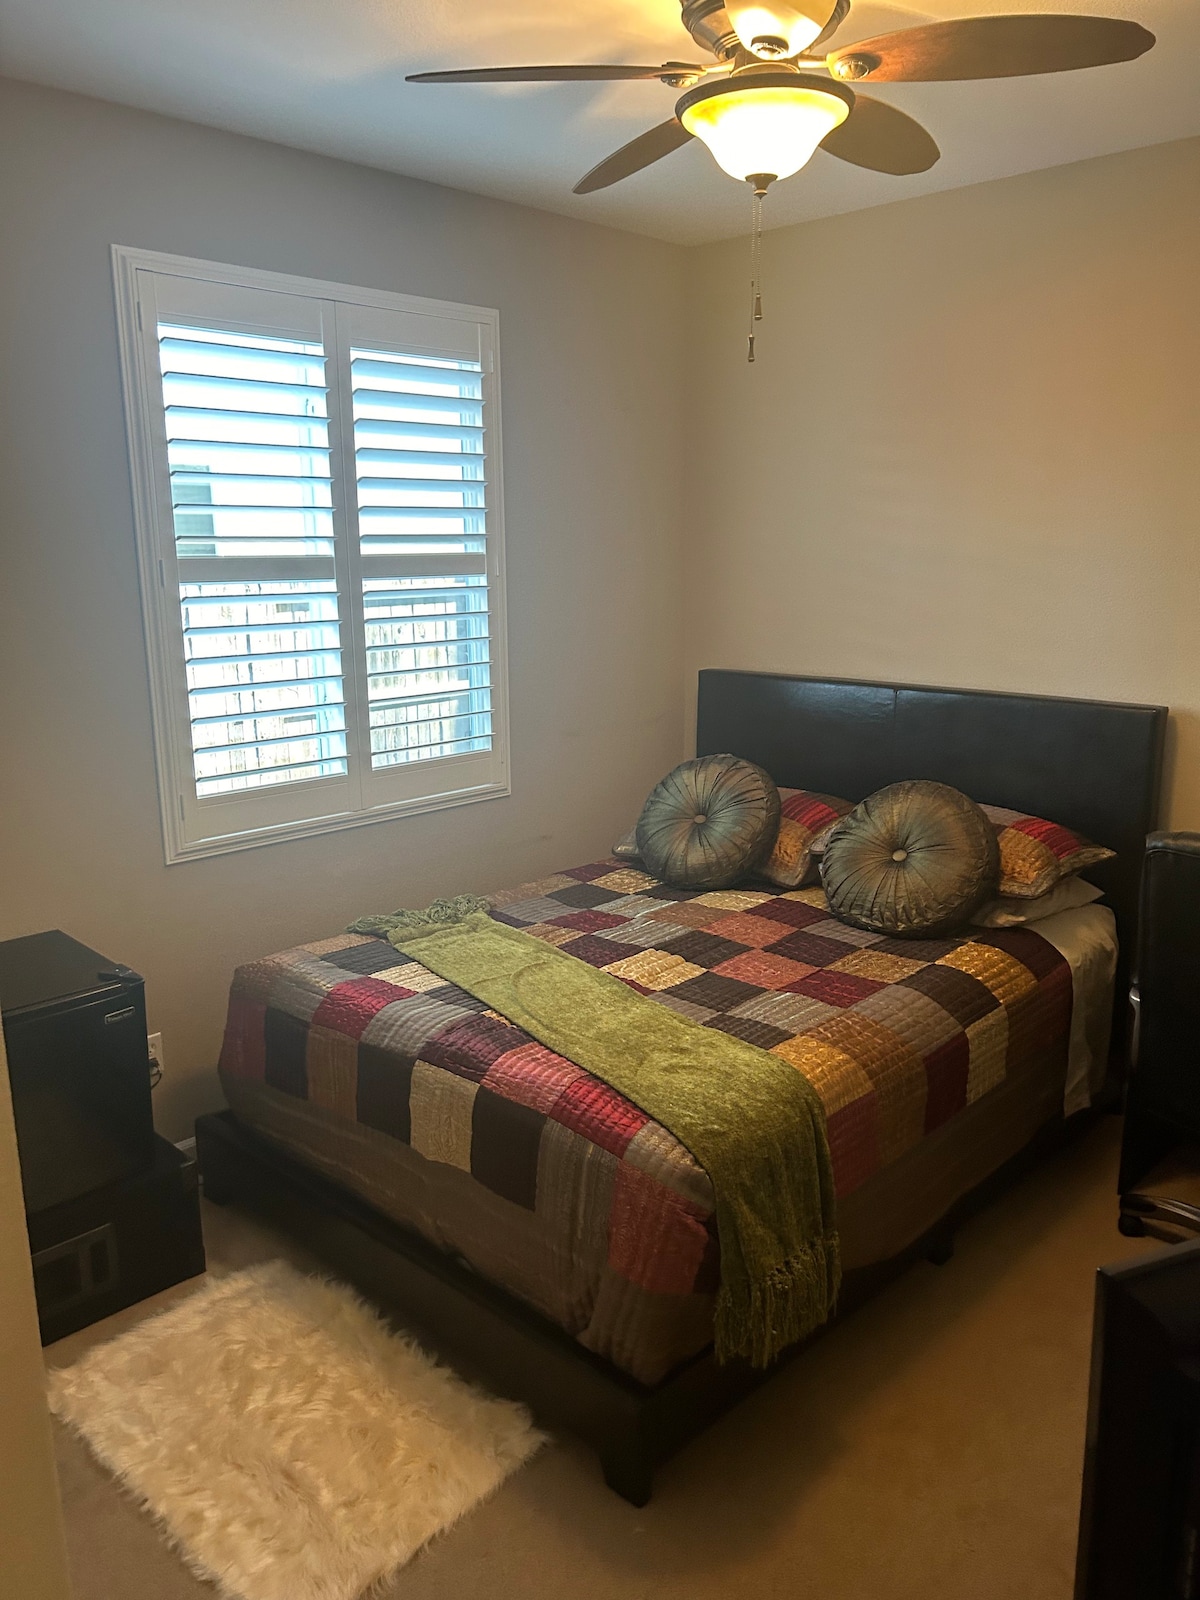 Clean/room NO XTRA fees! BEST deal! ONE Queen BED